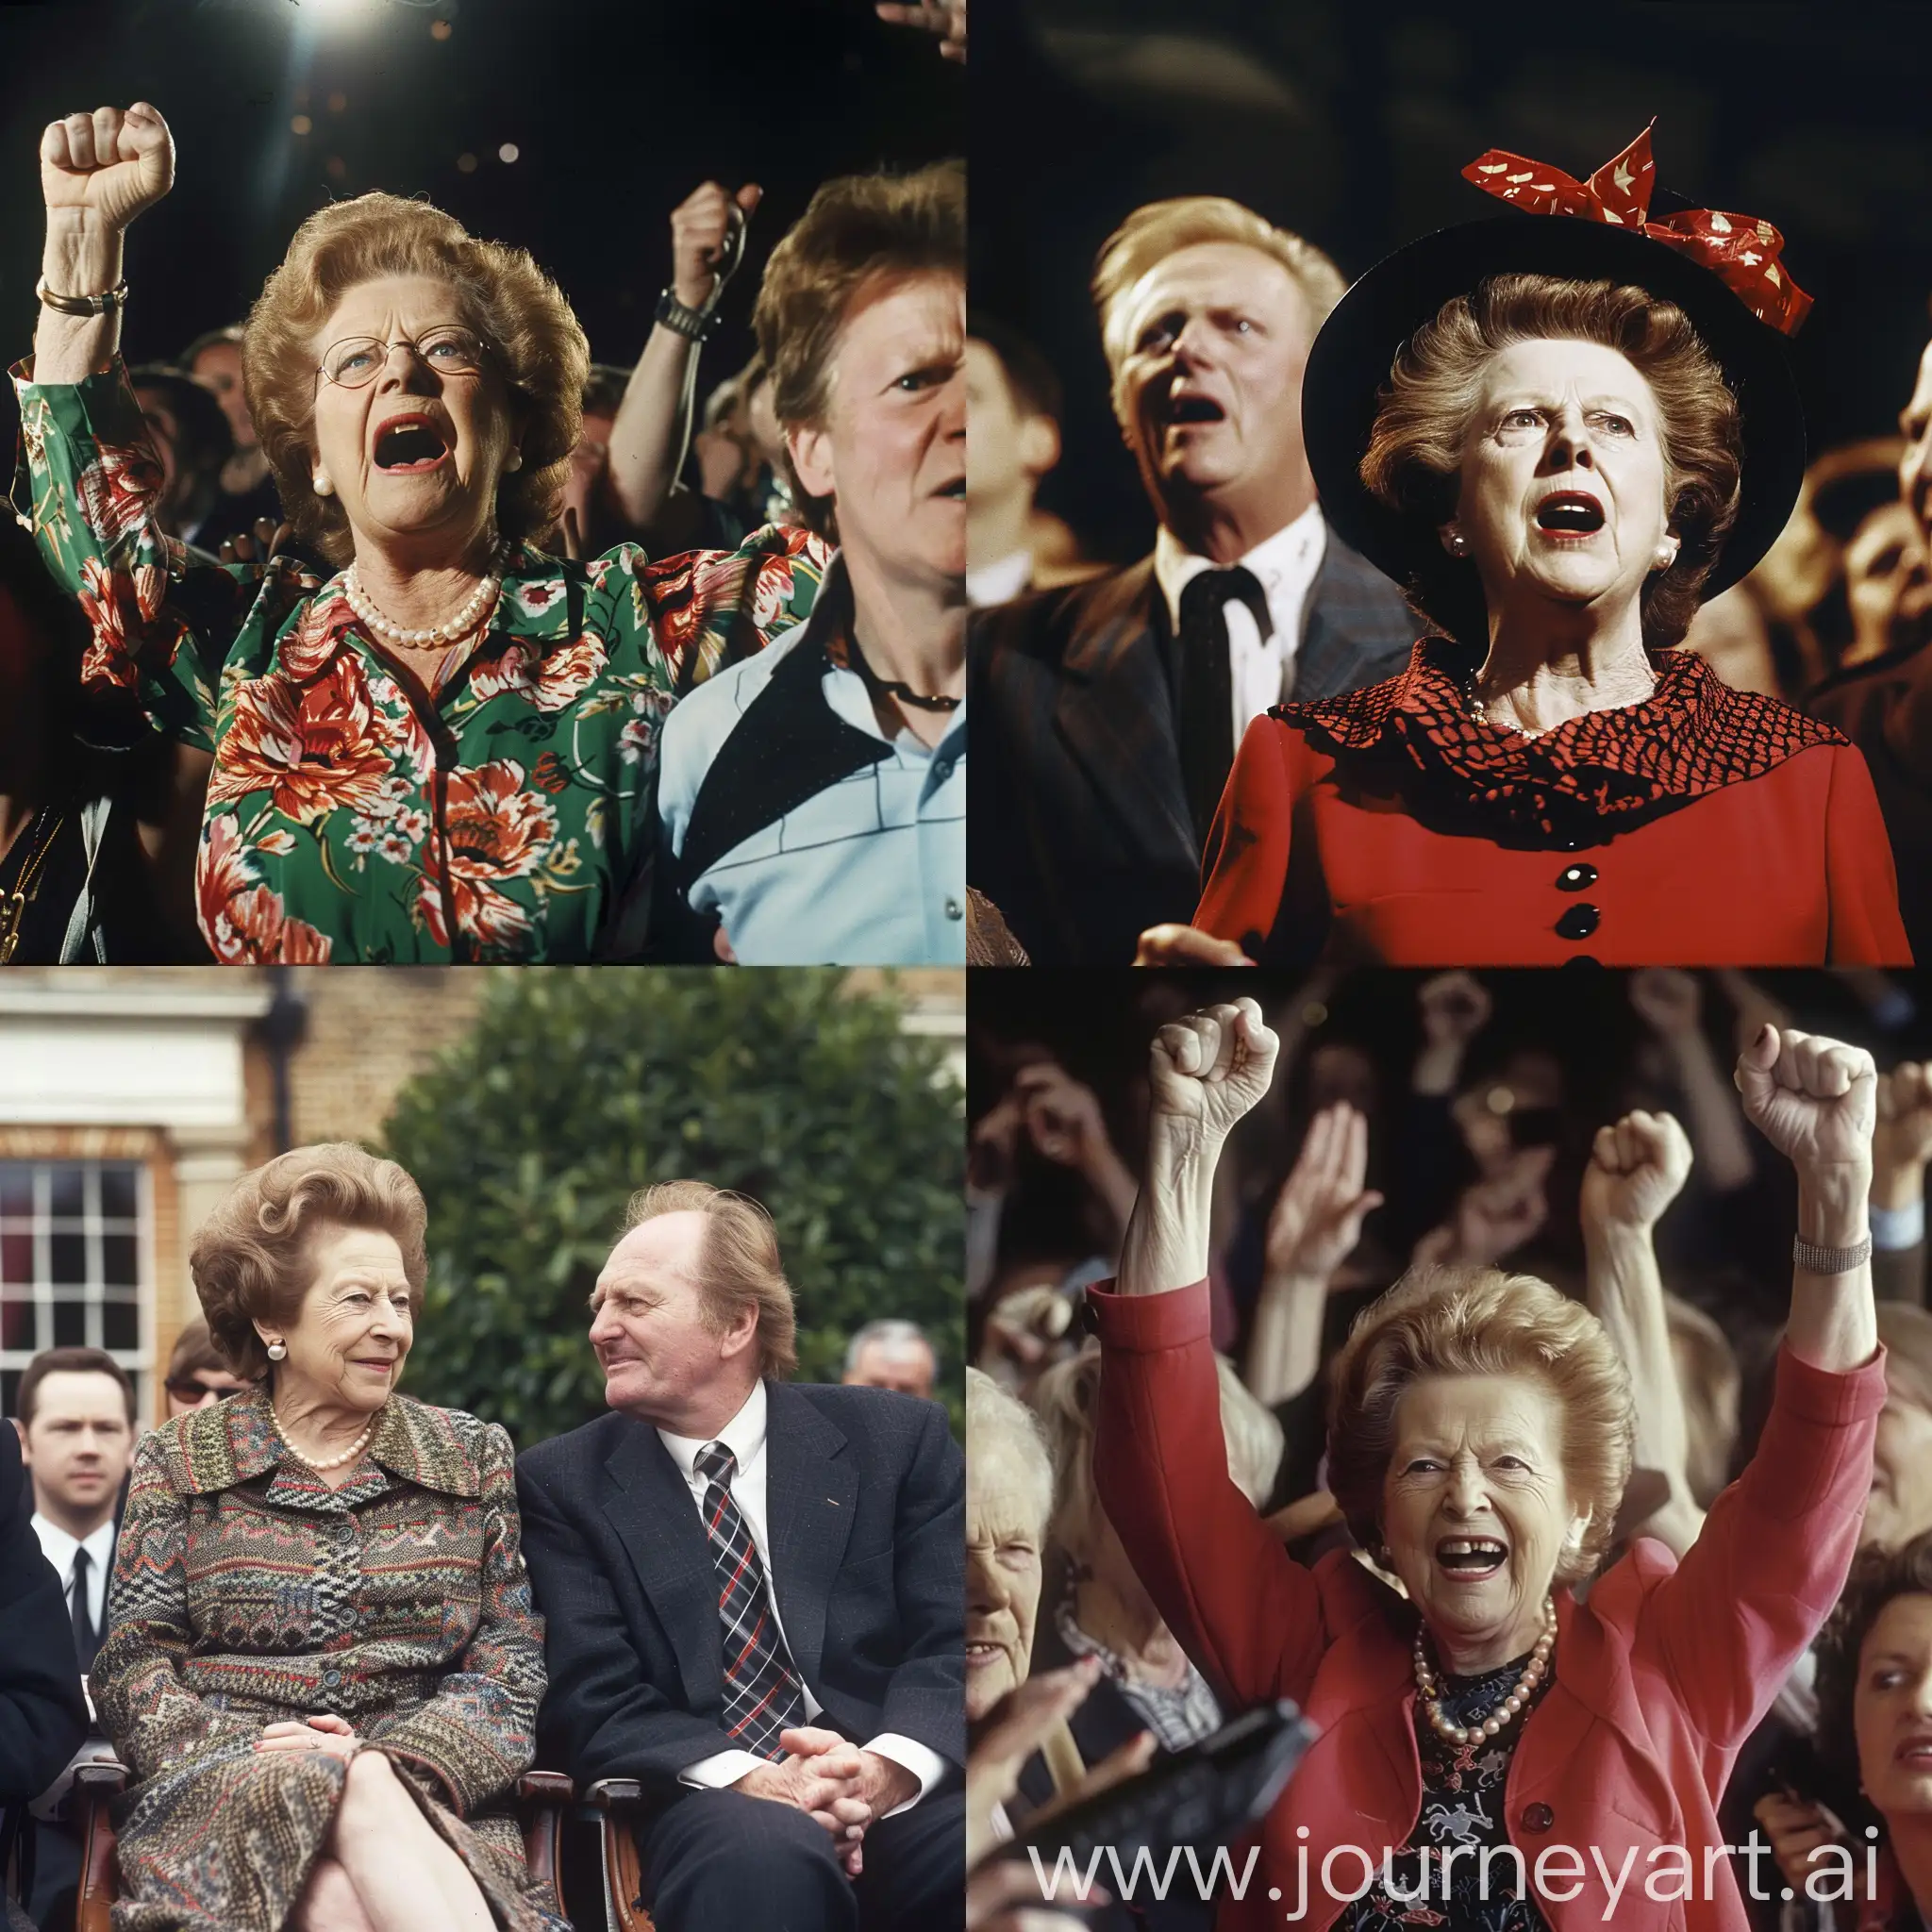 Margaret-Thatcher-and-George-Galloway-Dancing-Together